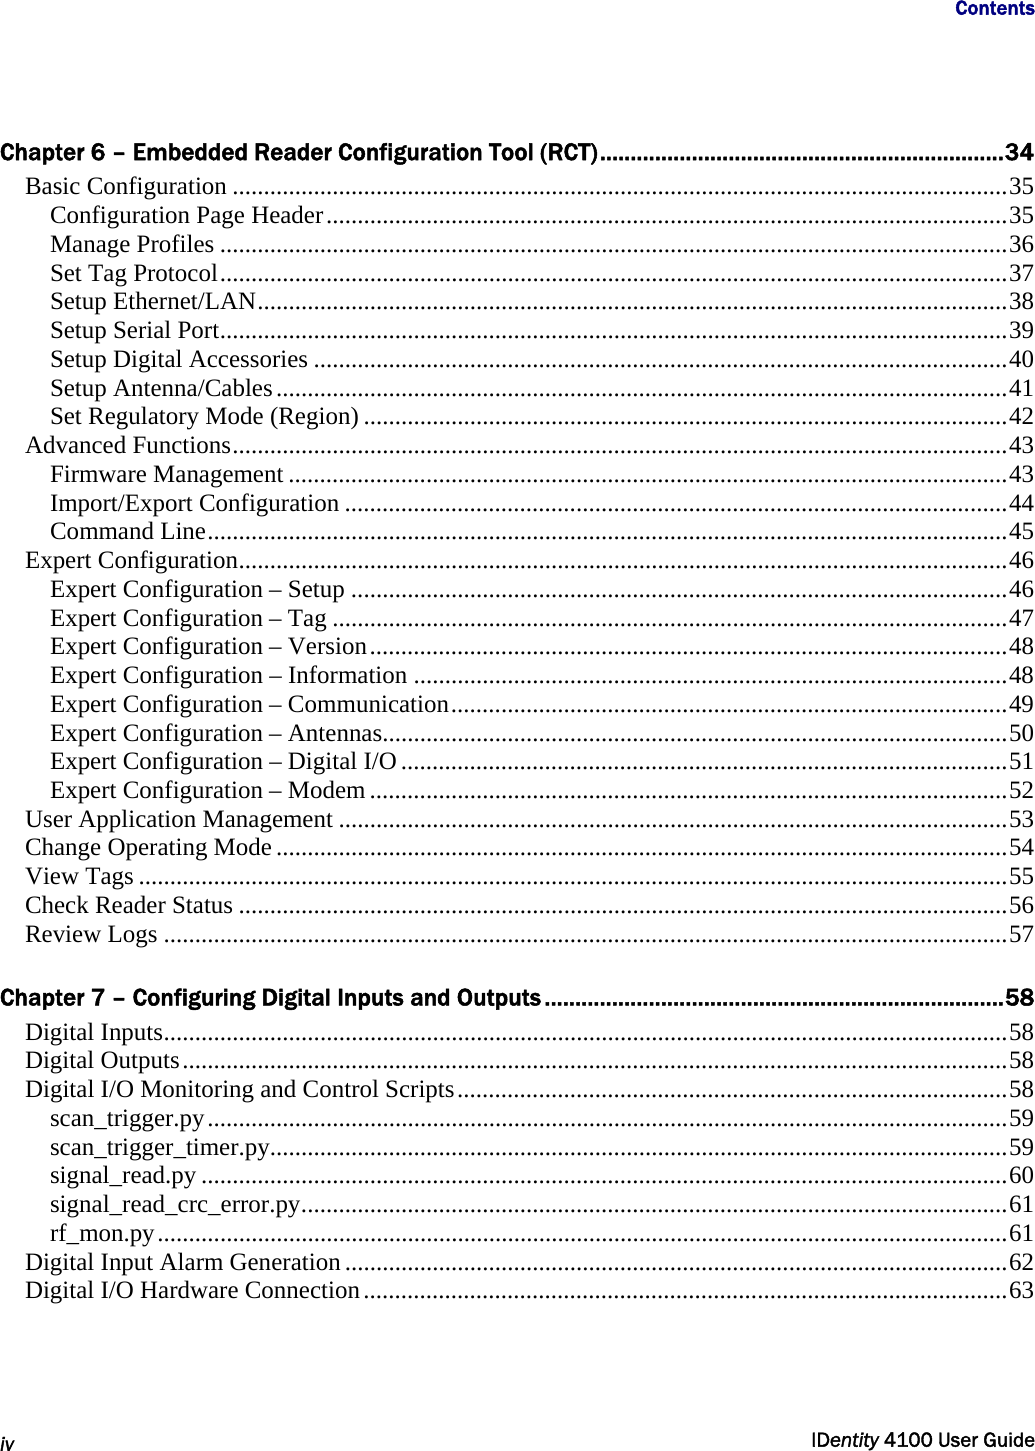                      Contents   iv  IDentity 4100 User Guide  Chapter 6 – Embedded Reader Configuration Tool (RCT)..................................................................34 Basic Configuration ............................................................................................................................35 Configuration Page Header.............................................................................................................35 Manage Profiles ..............................................................................................................................36 Set Tag Protocol..............................................................................................................................37 Setup Ethernet/LAN........................................................................................................................38 Setup Serial Port..............................................................................................................................39 Setup Digital Accessories ...............................................................................................................40 Setup Antenna/Cables.....................................................................................................................41 Set Regulatory Mode (Region) .......................................................................................................42 Advanced Functions............................................................................................................................43 Firmware Management ...................................................................................................................43 Import/Export Configuration ..........................................................................................................44 Command Line................................................................................................................................45 Expert Configuration...........................................................................................................................46 Expert Configuration – Setup .........................................................................................................46 Expert Configuration – Tag ............................................................................................................47 Expert Configuration – Version......................................................................................................48 Expert Configuration – Information ...............................................................................................48 Expert Configuration – Communication.........................................................................................49 Expert Configuration – Antennas....................................................................................................50 Expert Configuration – Digital I/O .................................................................................................51 Expert Configuration – Modem ......................................................................................................52 User Application Management ...........................................................................................................53 Change Operating Mode .....................................................................................................................54 View Tags ...........................................................................................................................................55 Check Reader Status ...........................................................................................................................56 Review Logs .......................................................................................................................................57  Chapter 7 – Configuring Digital Inputs and Outputs ...........................................................................58 Digital Inputs.......................................................................................................................................58 Digital Outputs....................................................................................................................................58 Digital I/O Monitoring and Control Scripts........................................................................................58 scan_trigger.py................................................................................................................................59 scan_trigger_timer.py......................................................................................................................59 signal_read.py .................................................................................................................................60 signal_read_crc_error.py.................................................................................................................61 rf_mon.py........................................................................................................................................61 Digital Input Alarm Generation ..........................................................................................................62 Digital I/O Hardware Connection.......................................................................................................63 